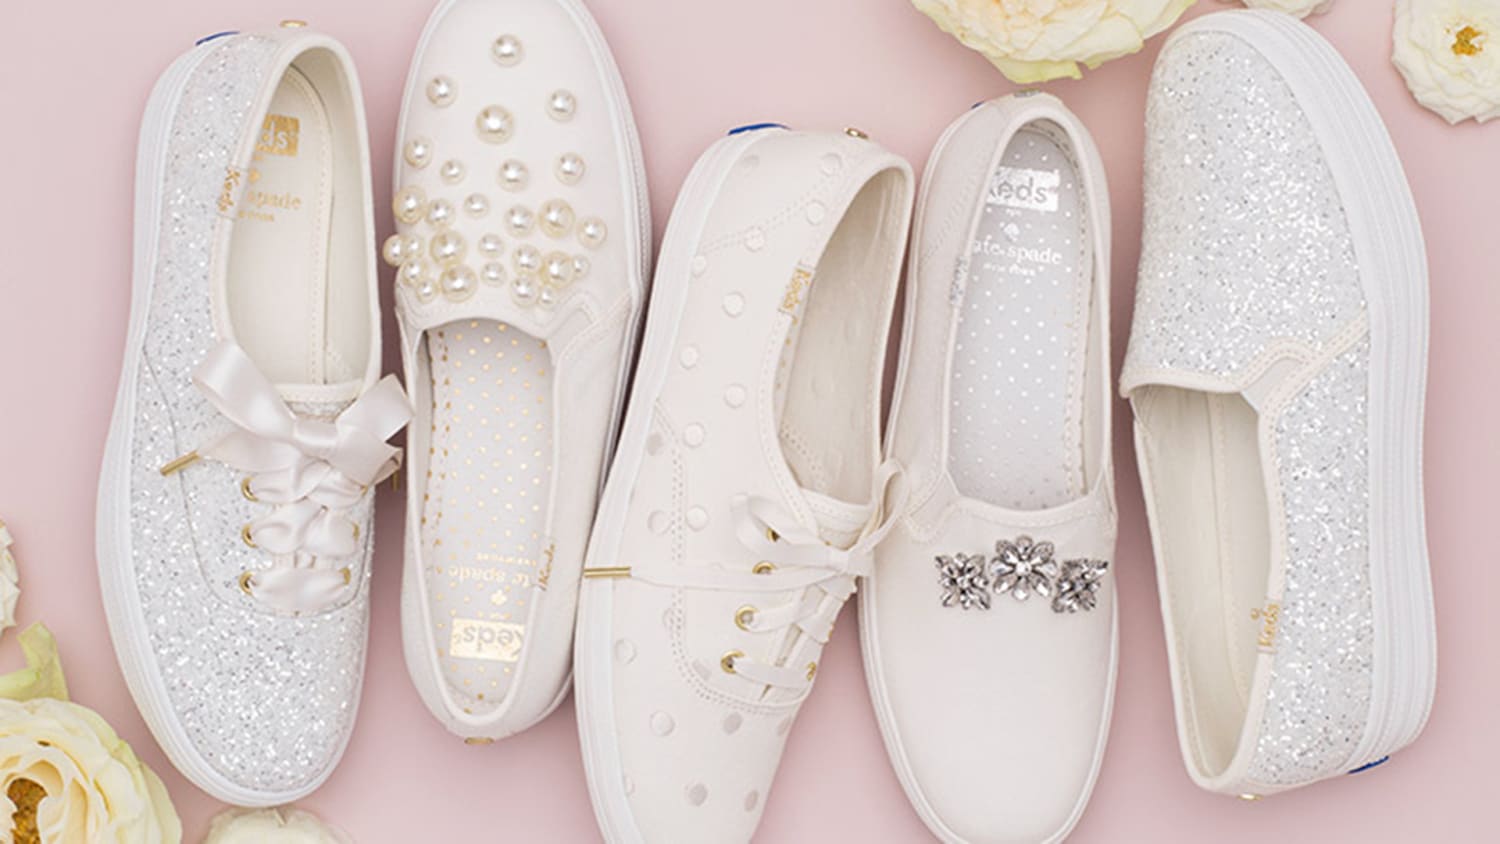 Keds and Kate Spade created a sneakers 